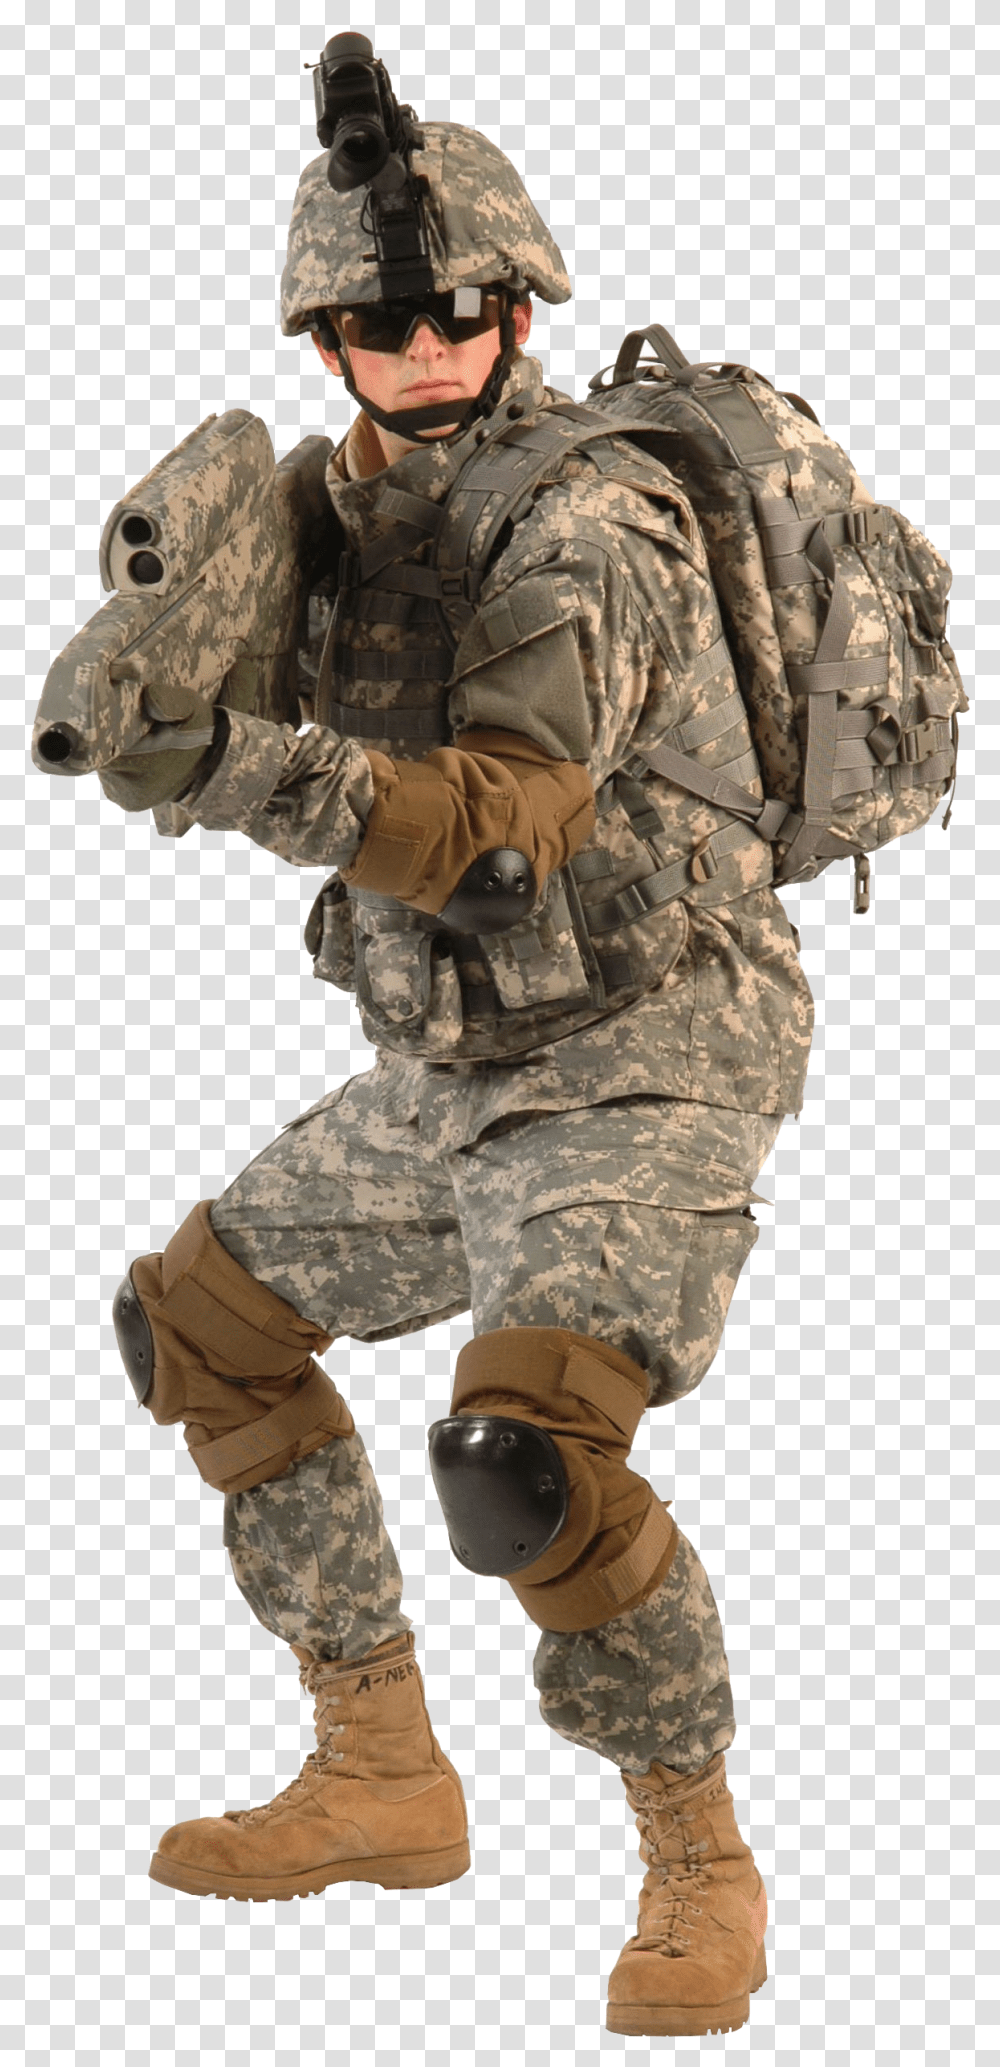 Soldier Download Image Chewbacca Costume, Helmet, Apparel, Military Transparent Png